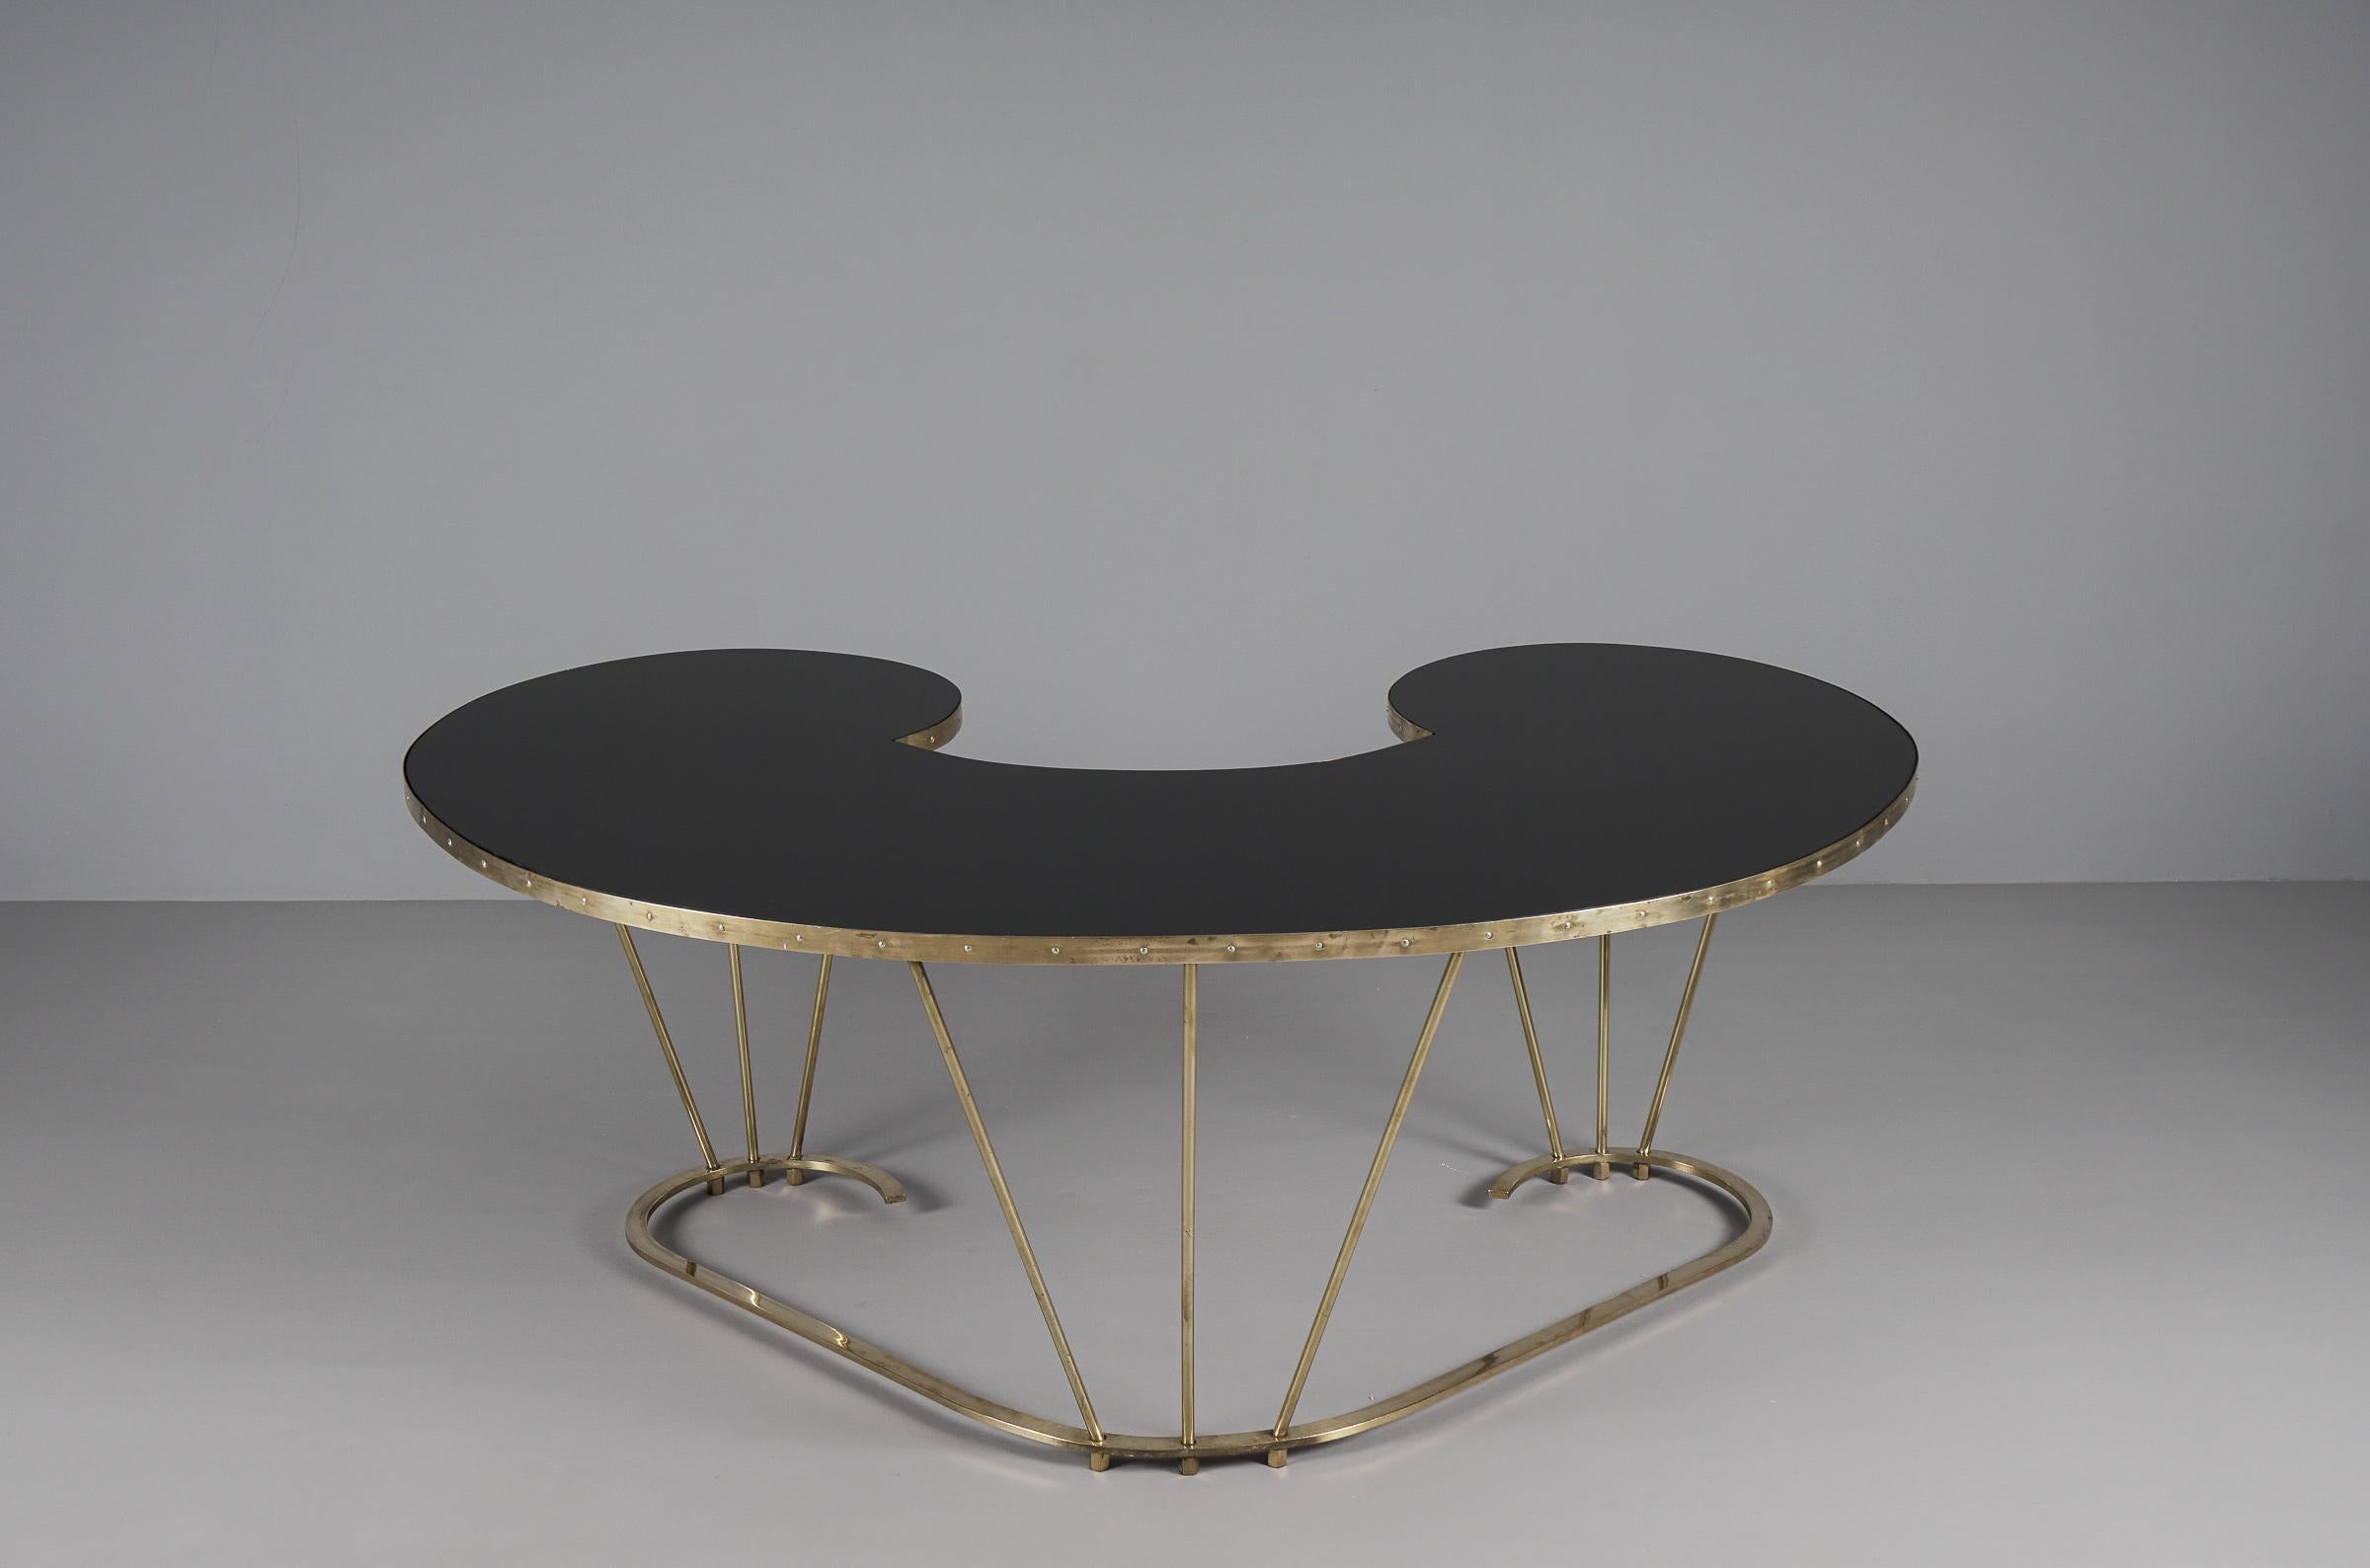 Unique Desk or Dressing Table Made of Solid Brass and Black Glass, 1950s, Italy In Good Condition For Sale In Nürnberg, Bayern